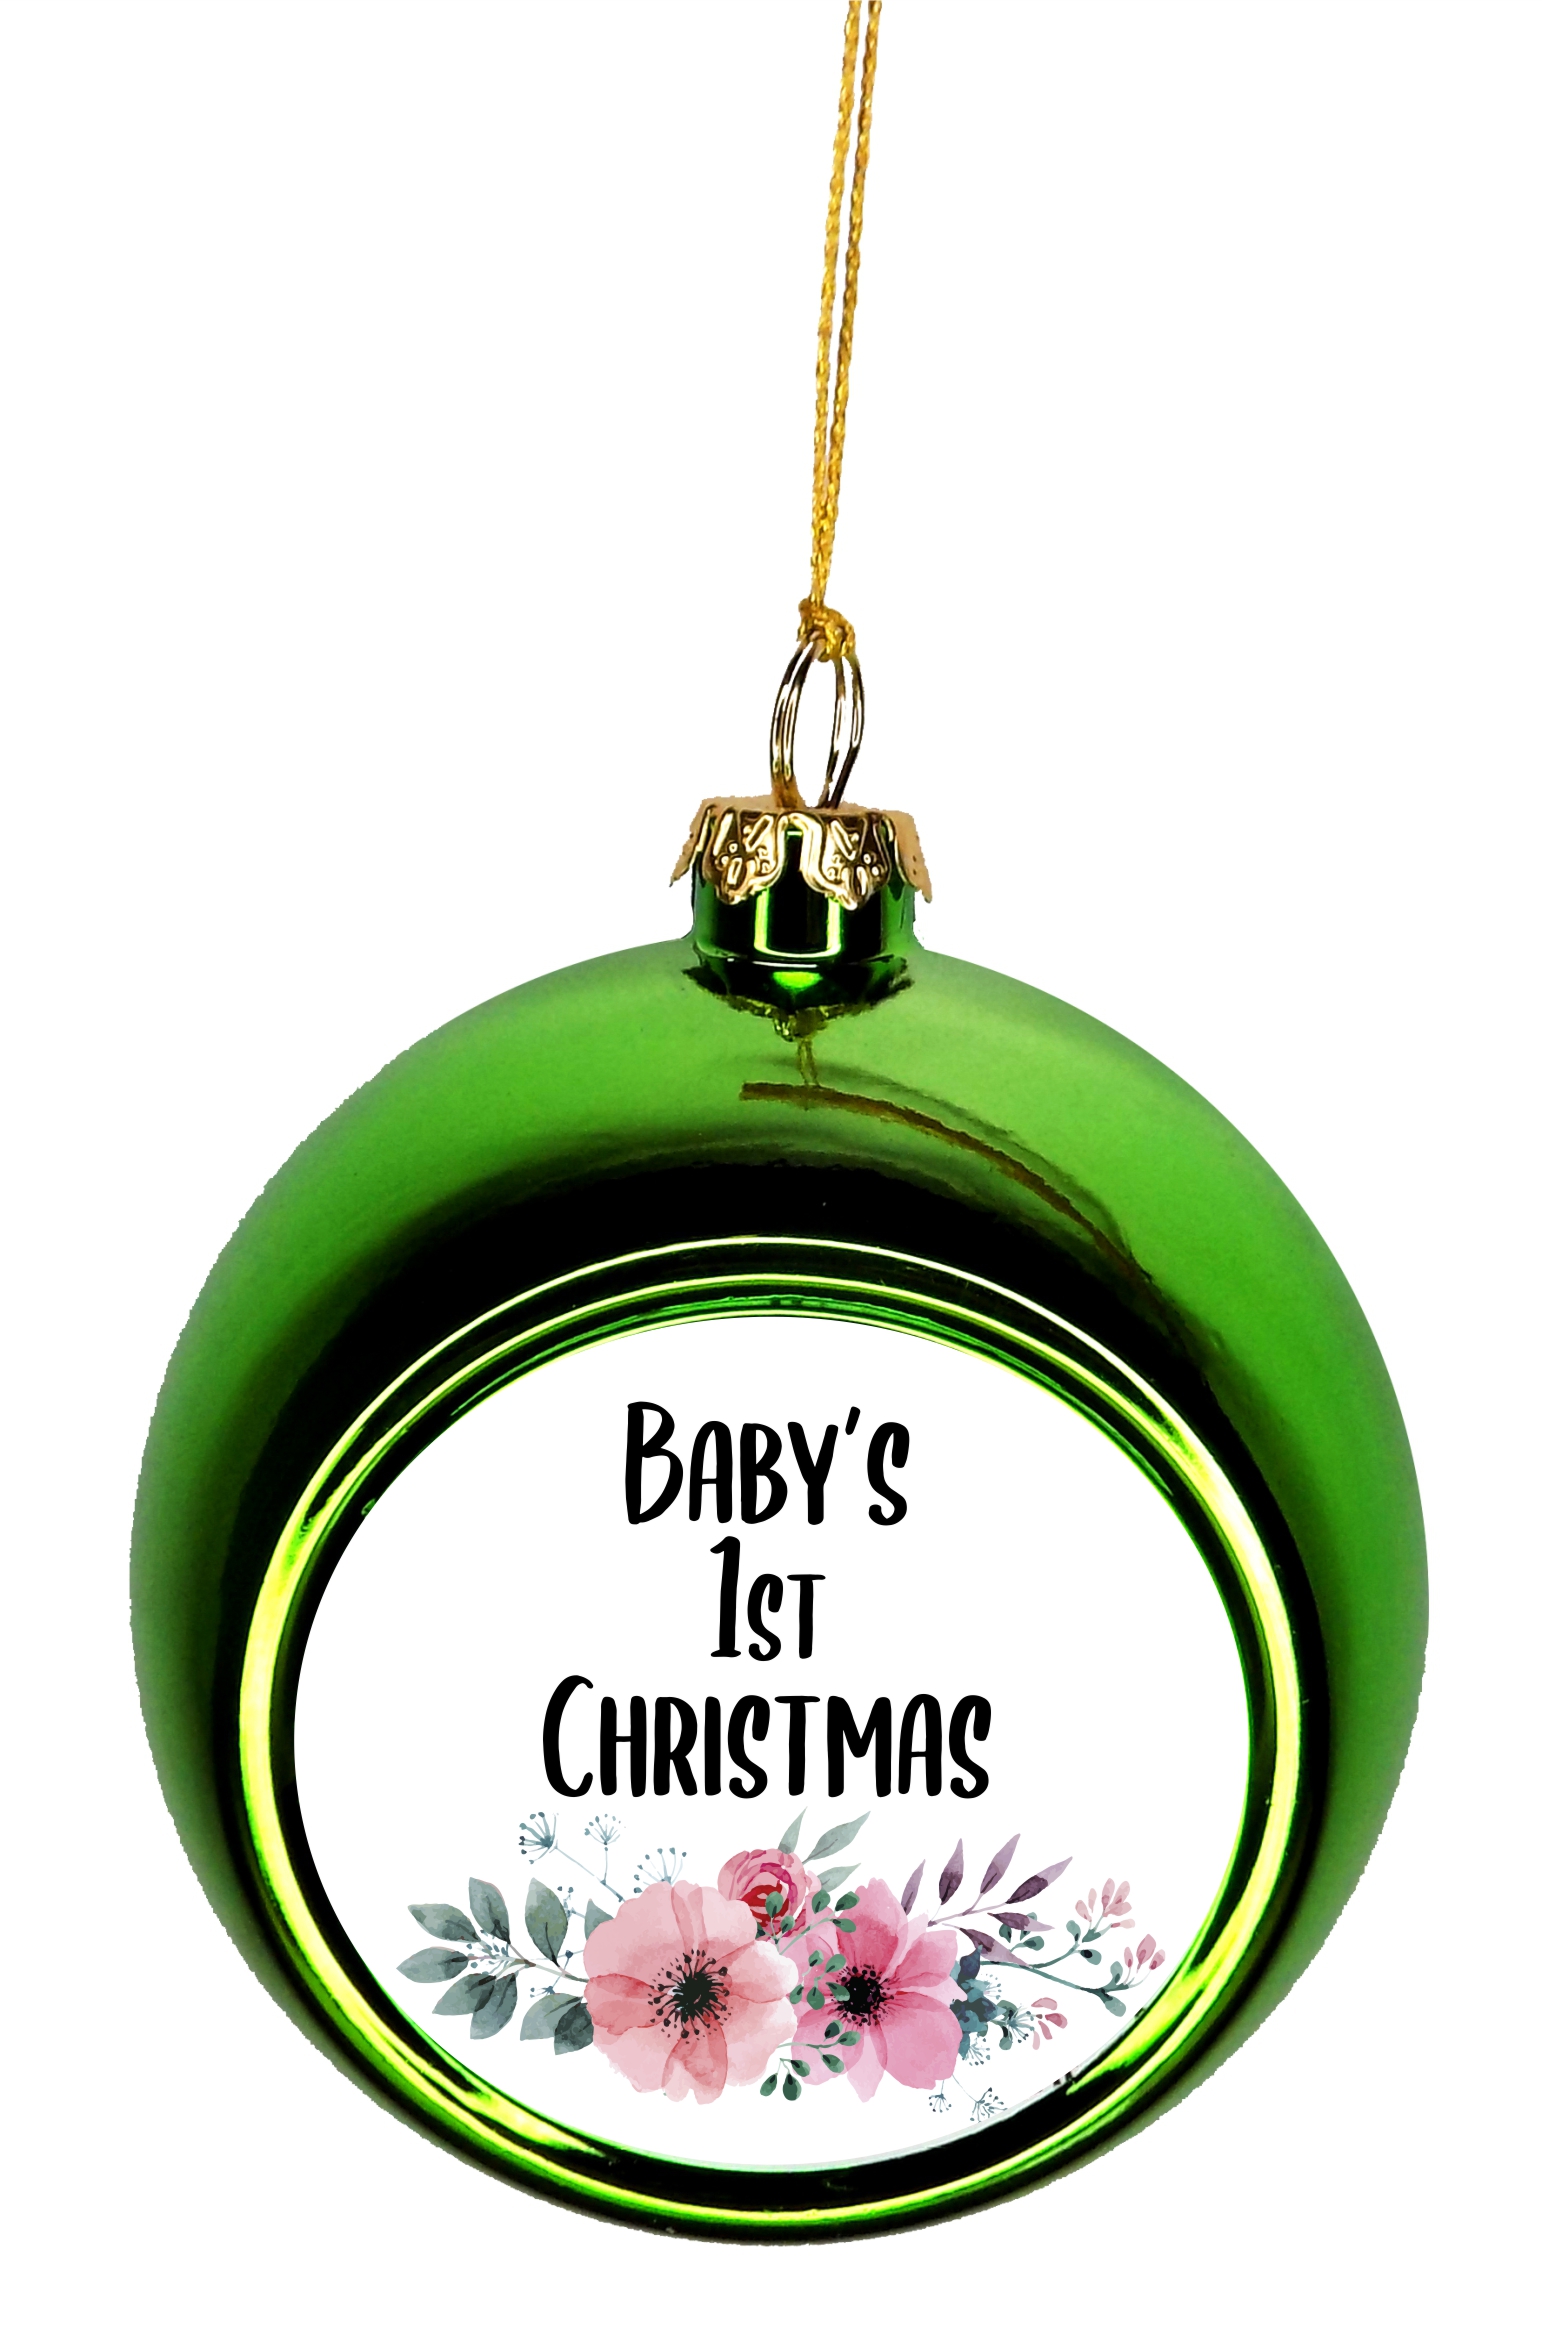 New Baby First Year Ornament Babys First Christmas Xmas Ornament - Baby 1st Xmas Ornament - Baby 1st Christmas Ornament Christmas DÃ©cor Green Ball Ornaments - image 1 of 1